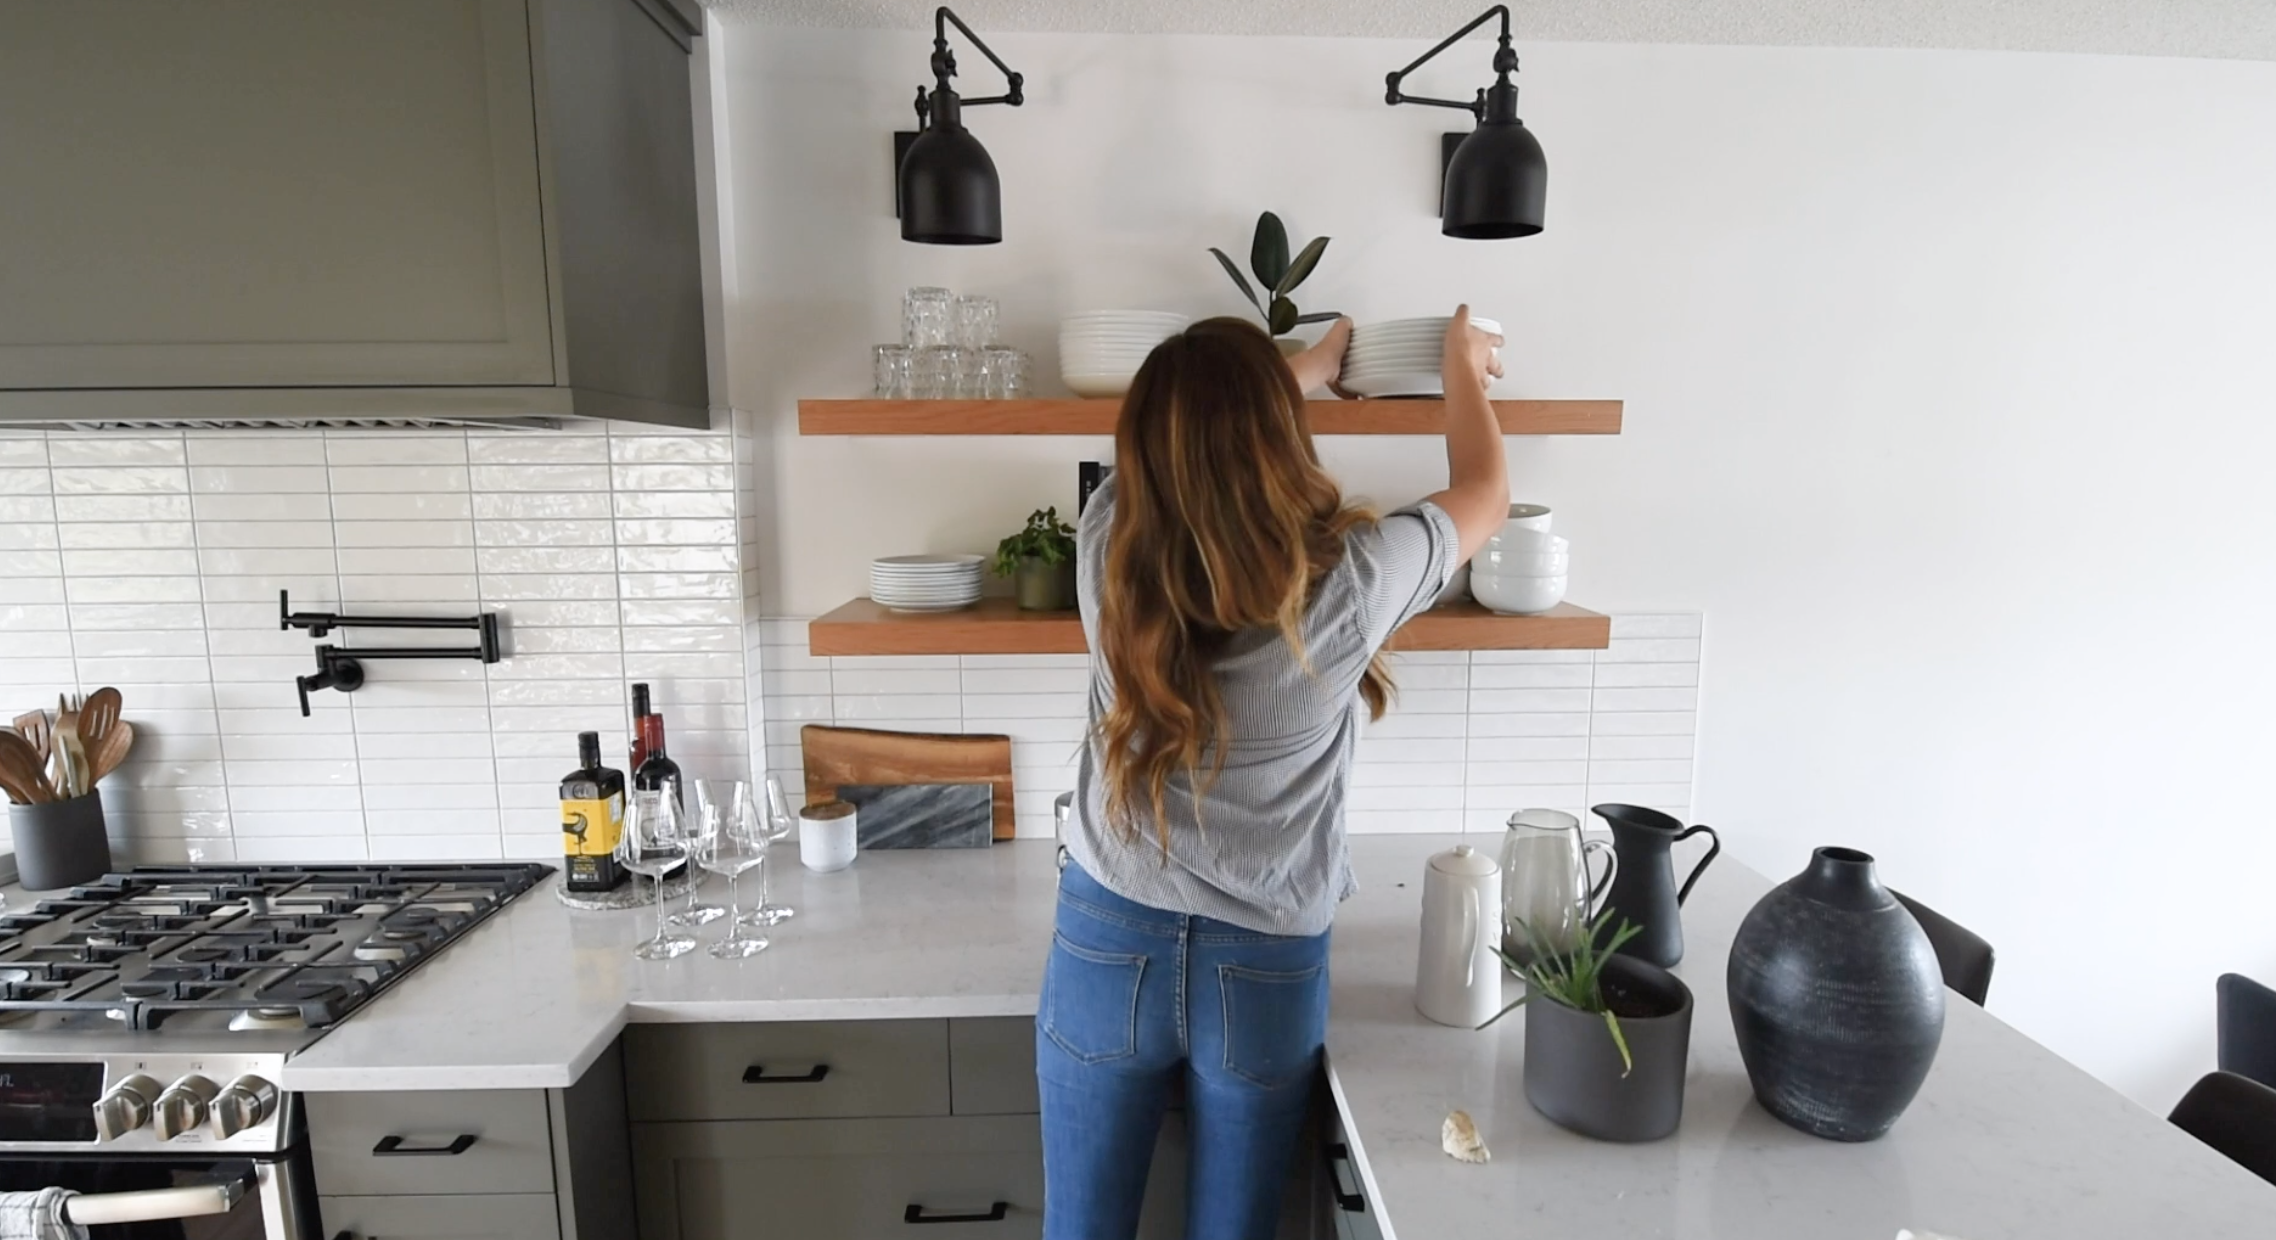 How to style kitchen open shelves for function and look